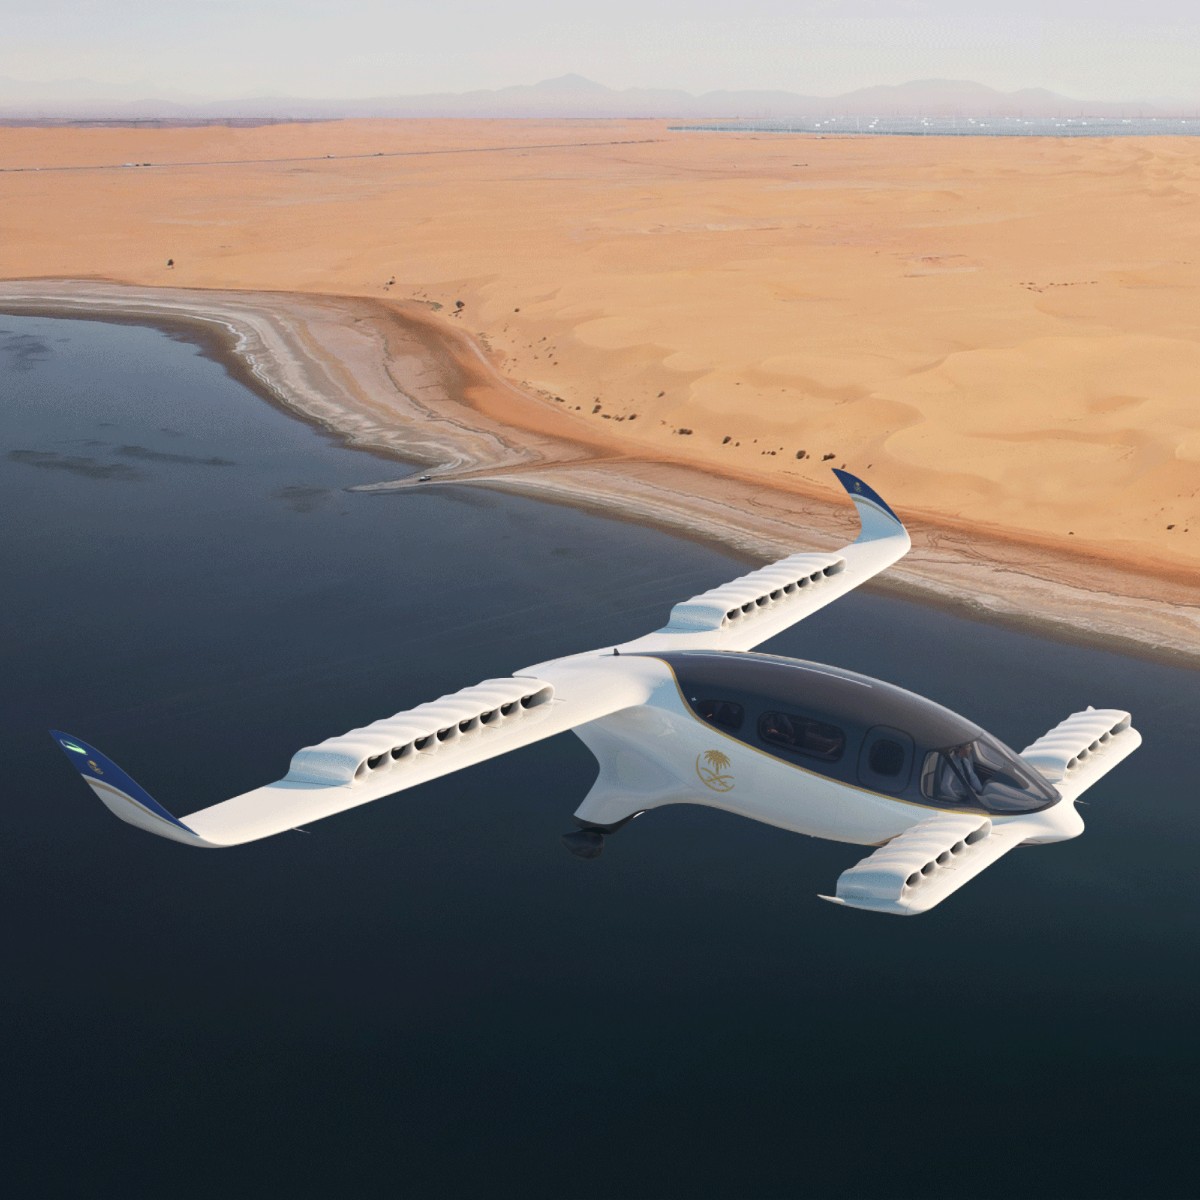 Great to be at @FIIKSA today where we announced a strategic partnership with @Saudi_Airlines for the development and operation of an eVTOL network across Saudi Arabia. As part of the agreement, SAUDIA plans to purchase 100 all-electric Lilium Jets. #Lilium fal.cn/3t4P1